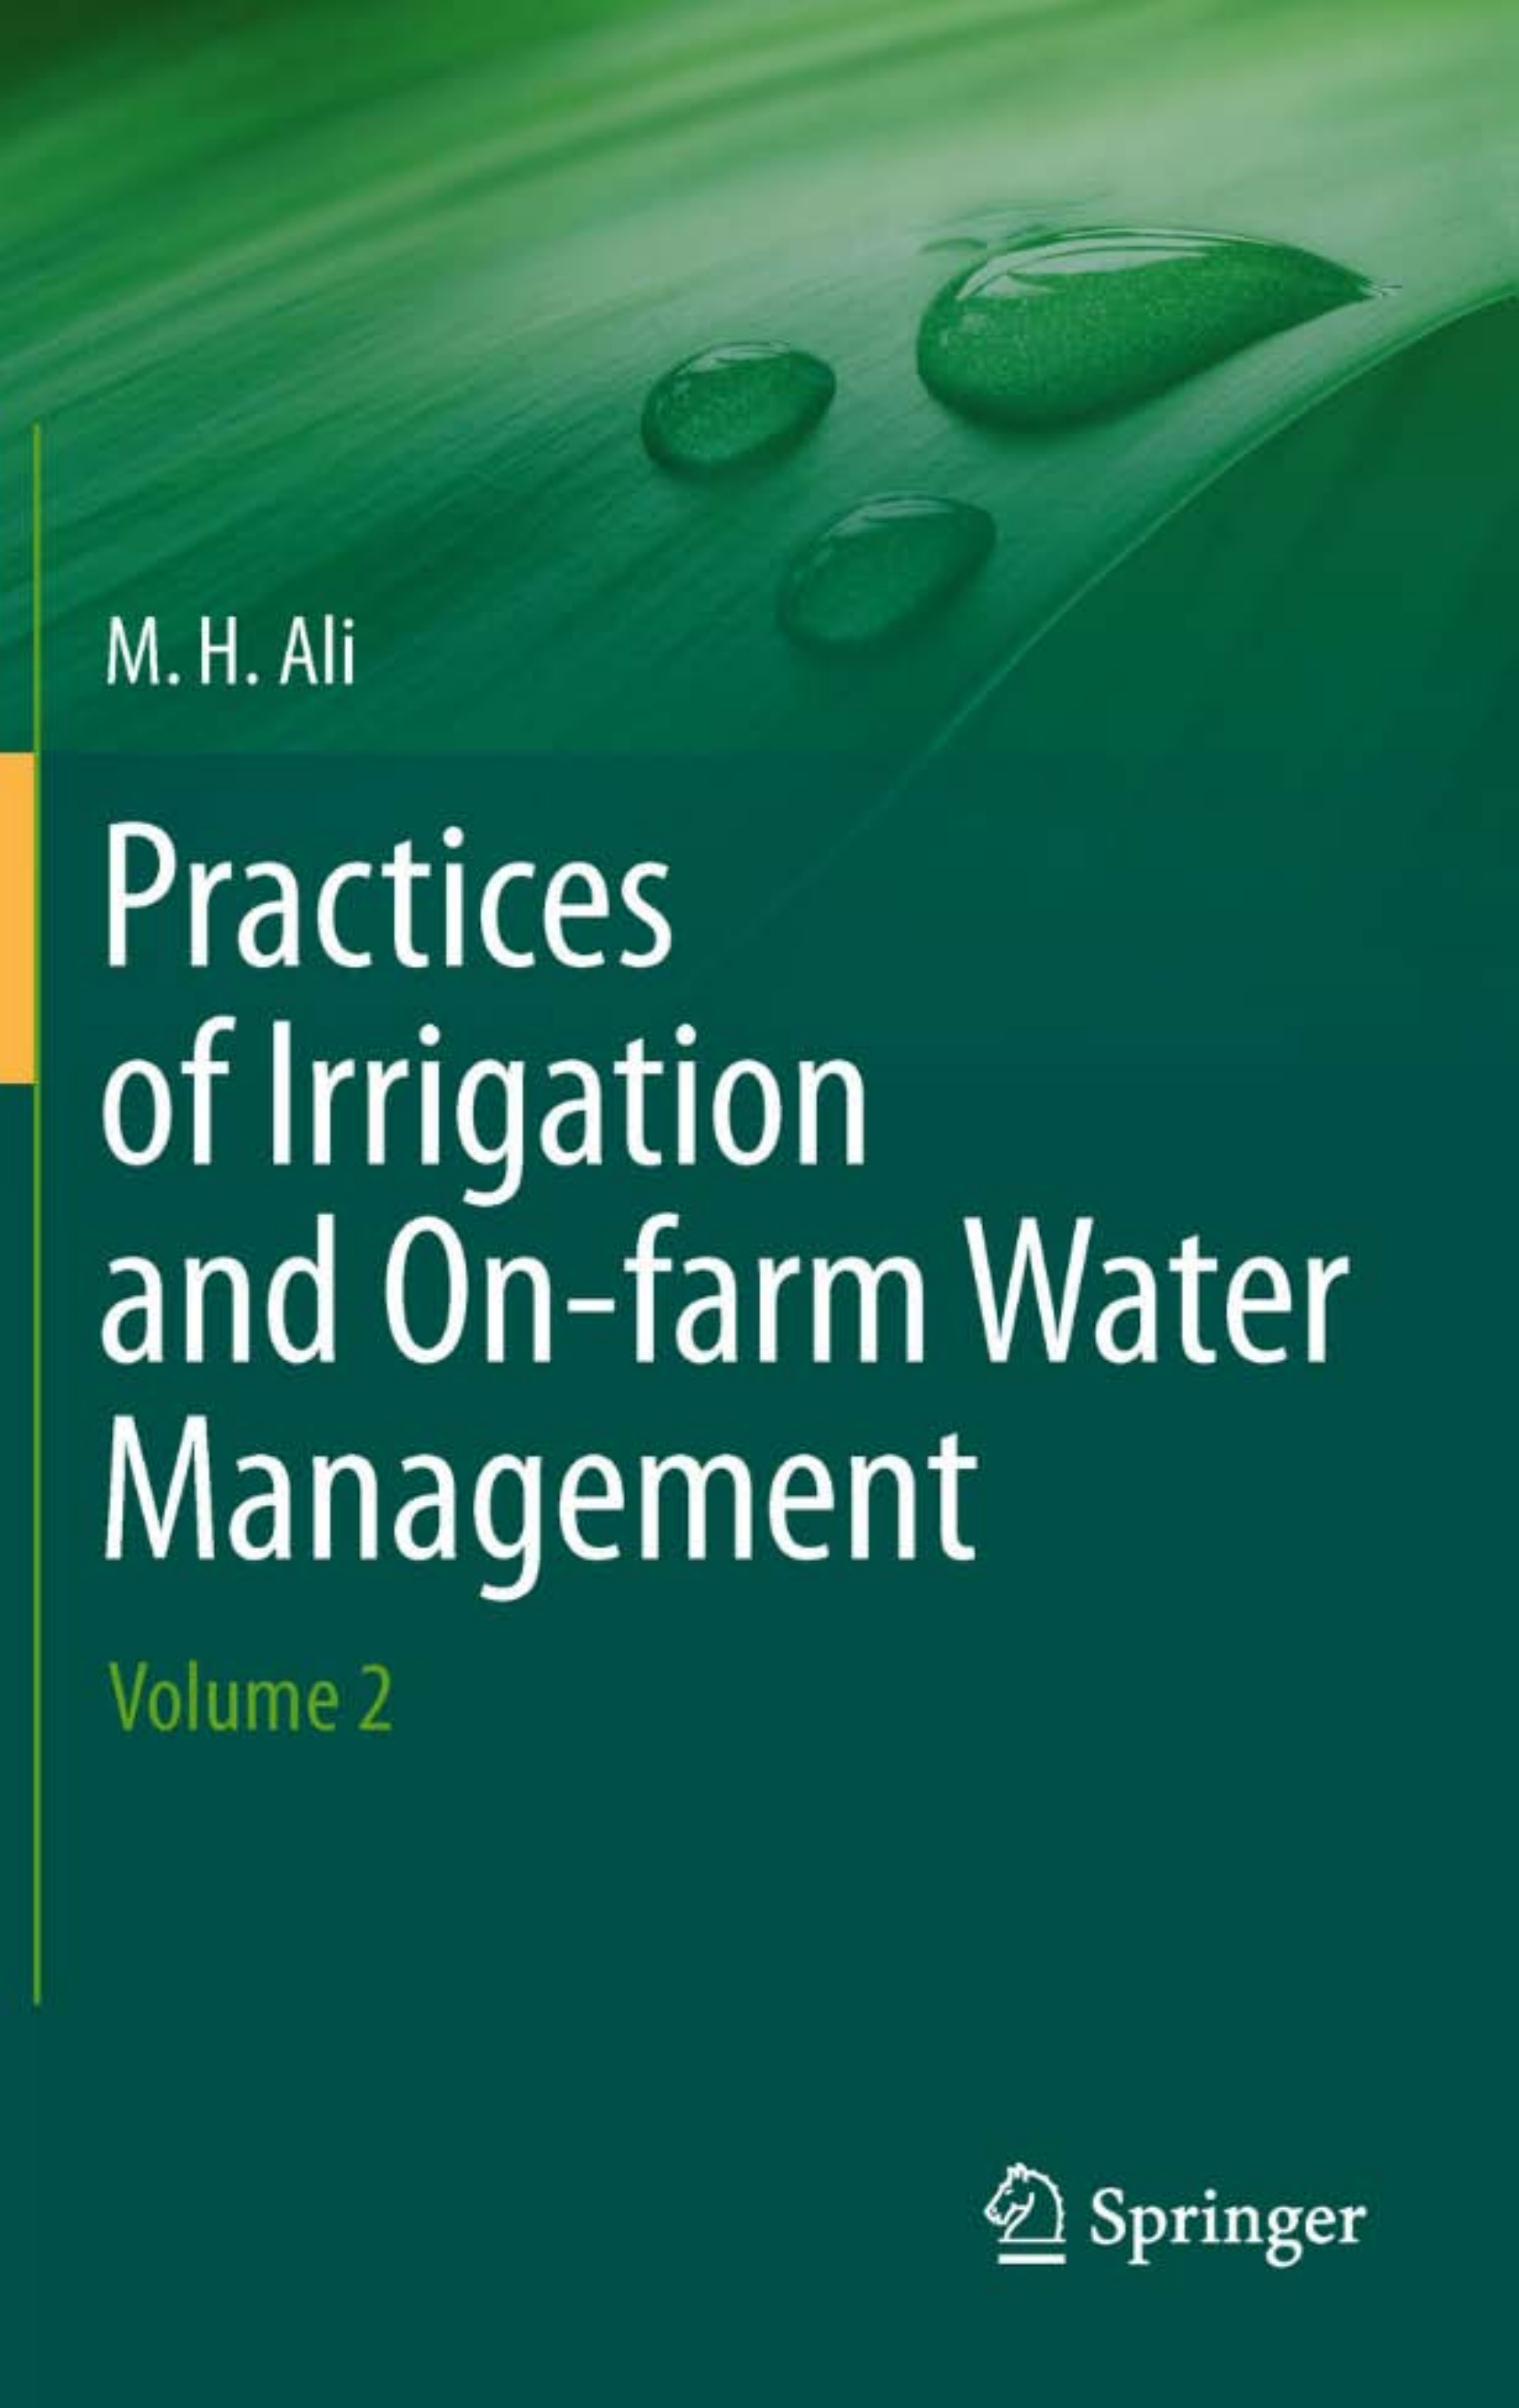 Practices of Irrigation and On farm Water Management (Volume 2)